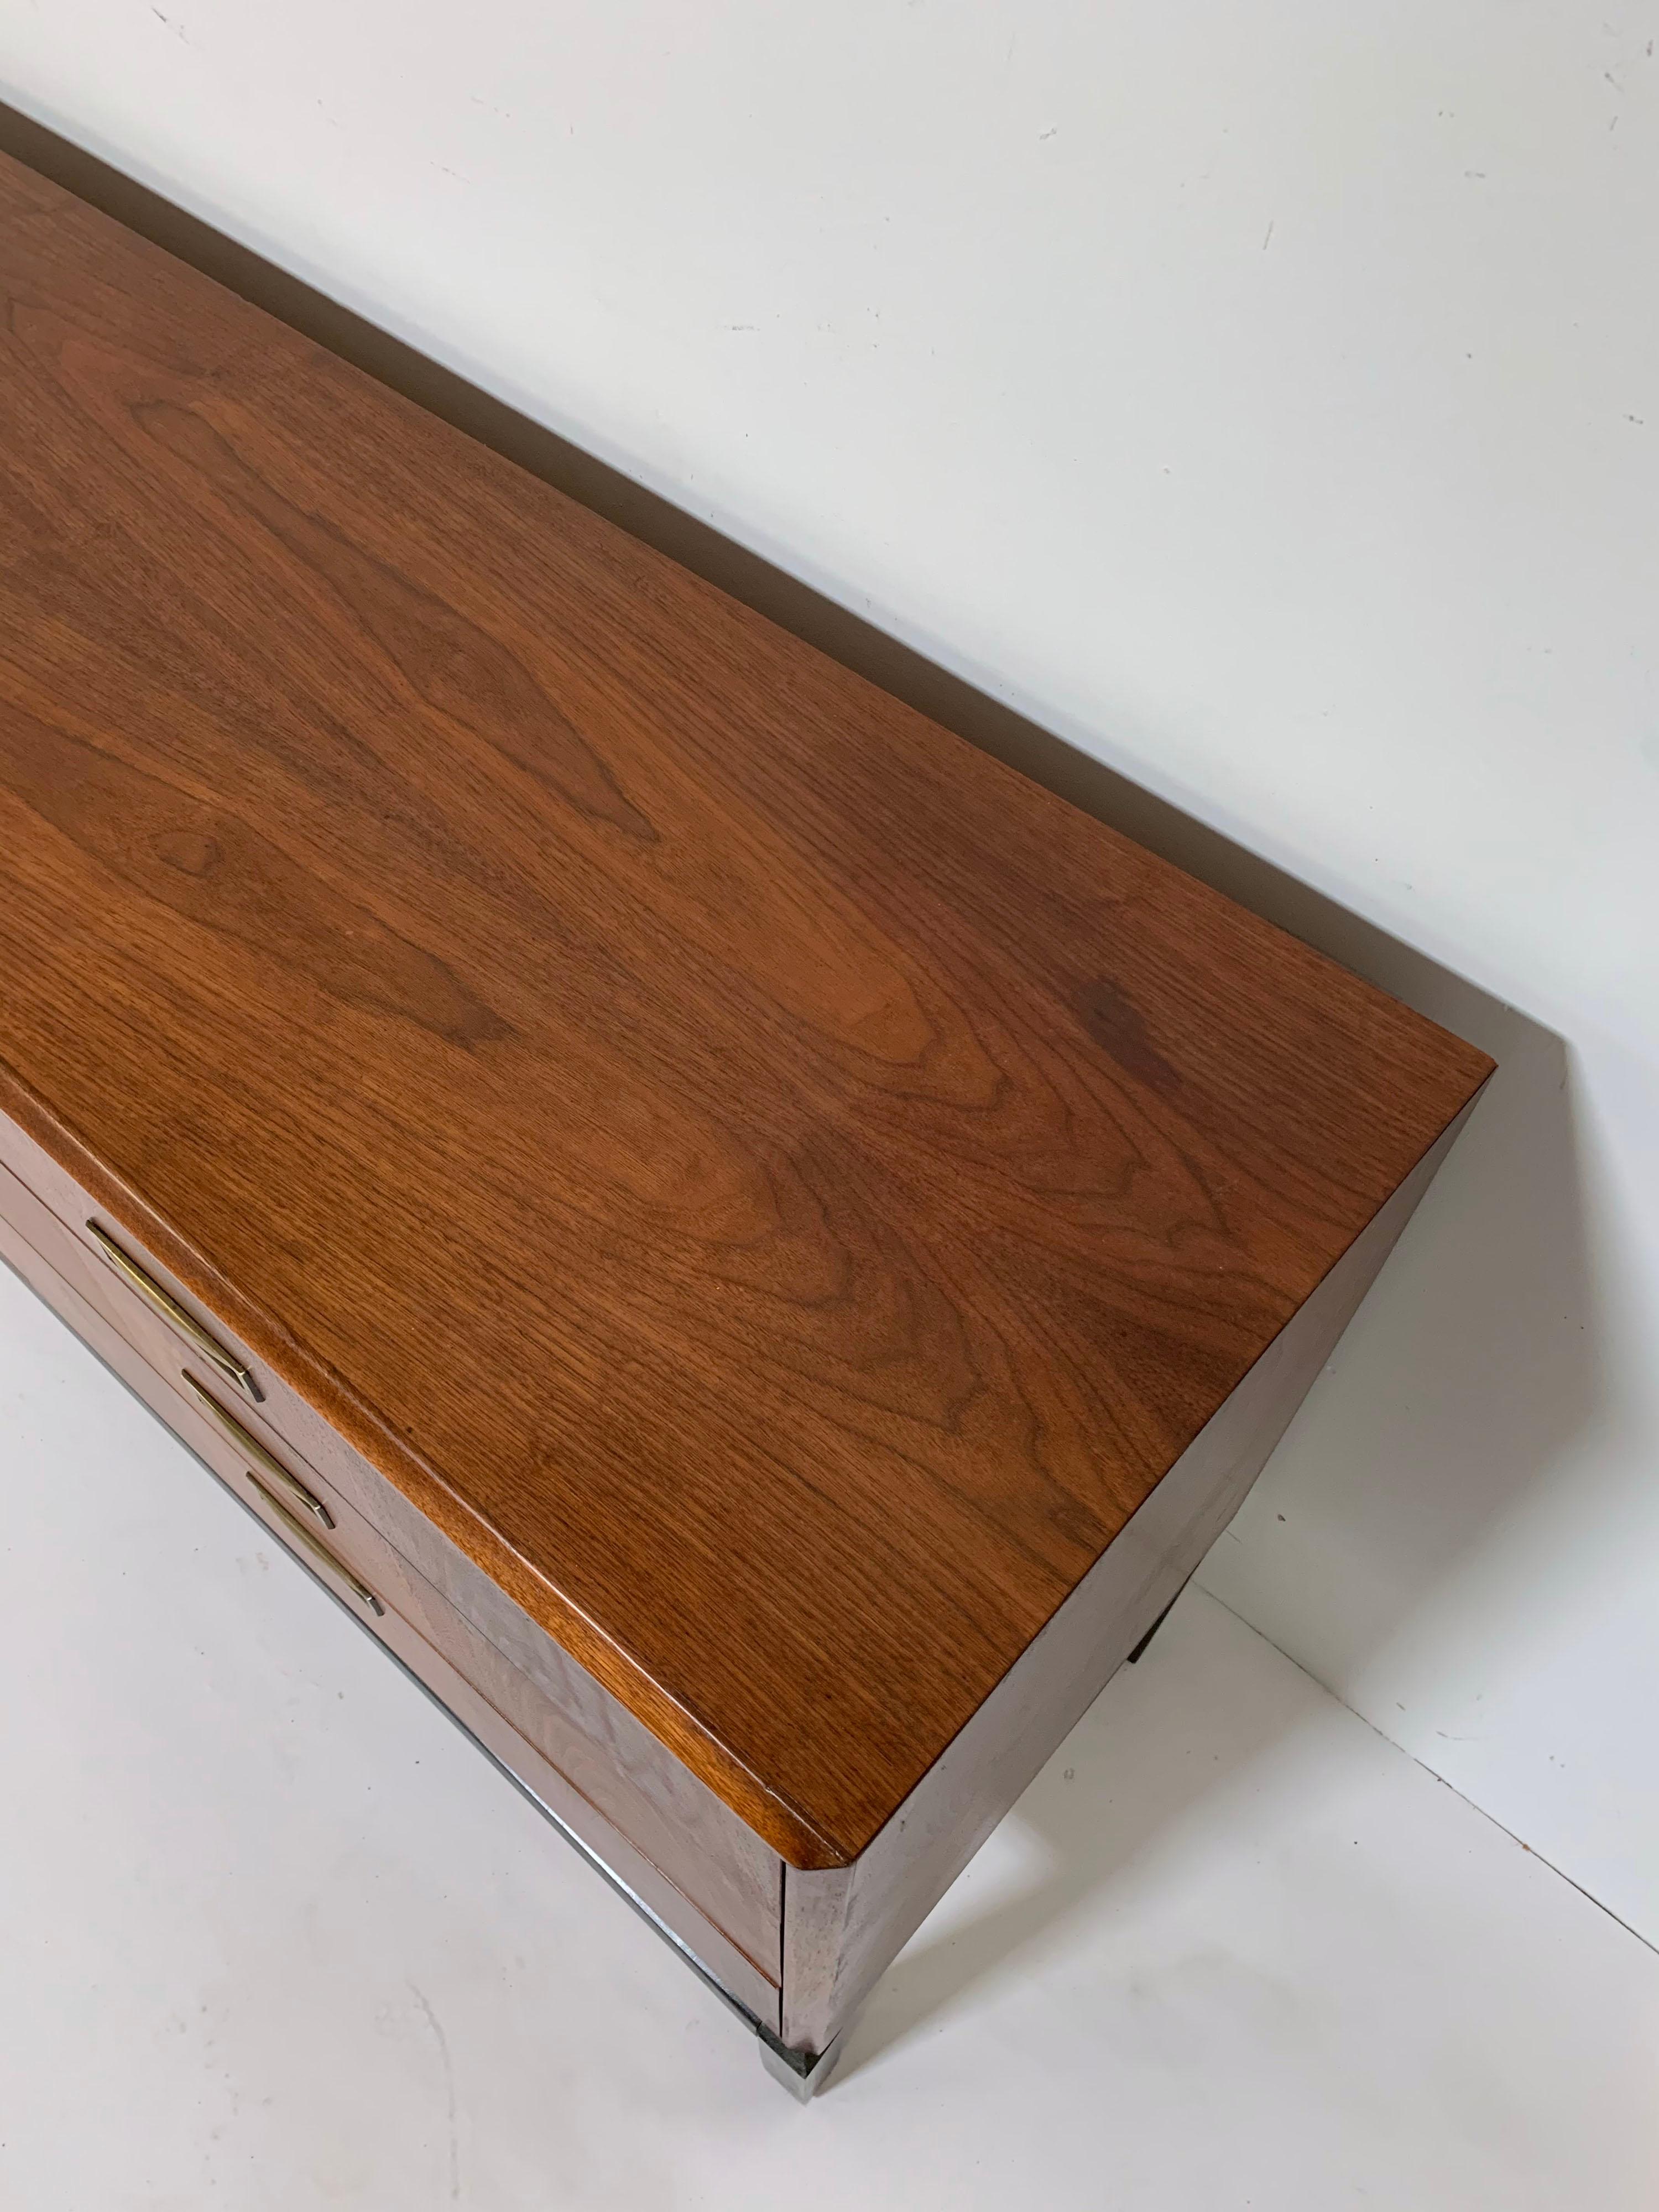 Midcentury Six-Drawer Walnut Dresser by Jack Cartwright for Founders circa 1970s 2